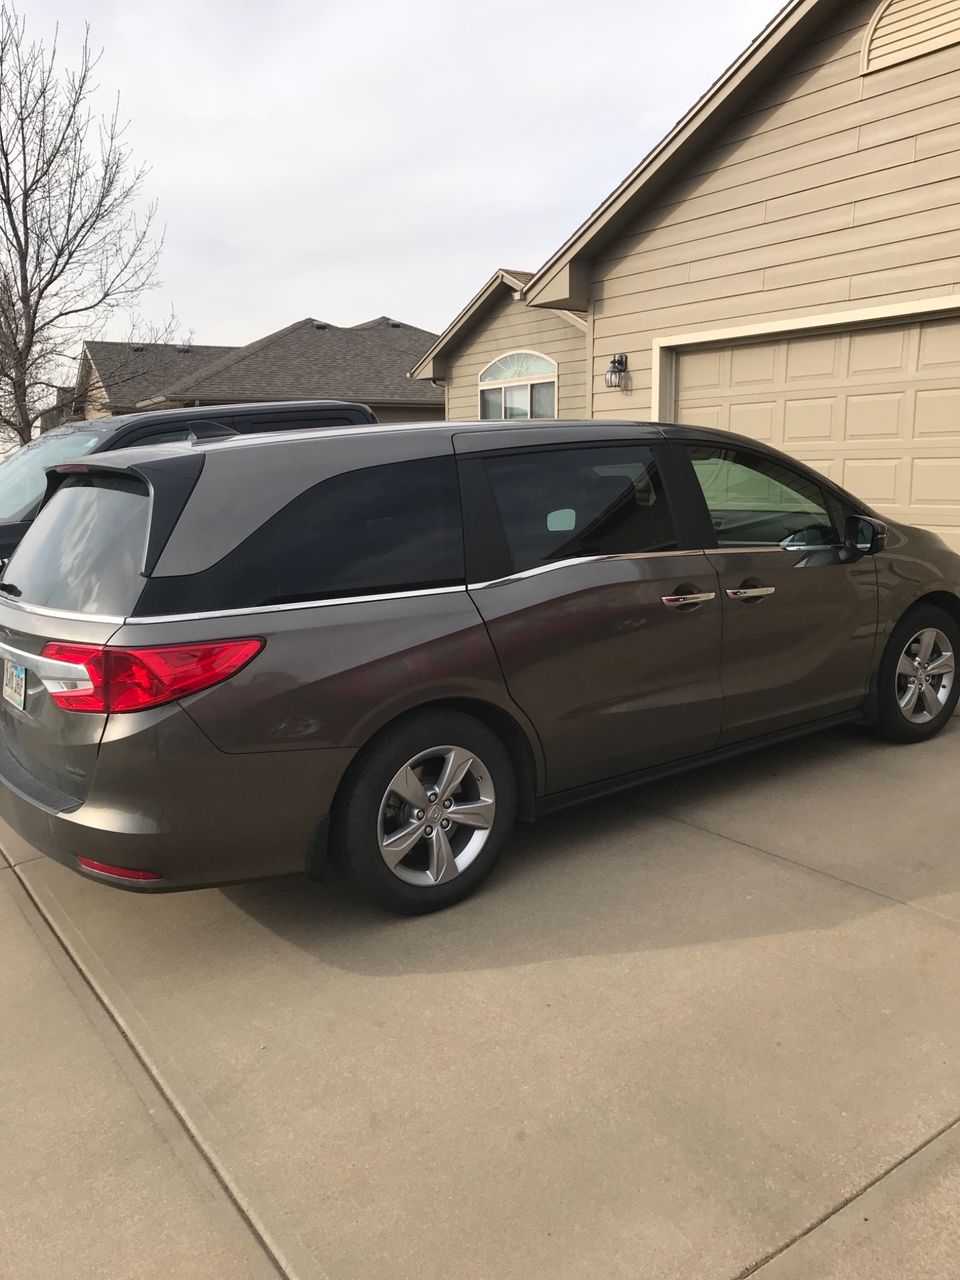 2018 Honda Odyssey | Sioux Falls, SD, Pacific Pewter Metallic (Brown & Beige), Front Wheel